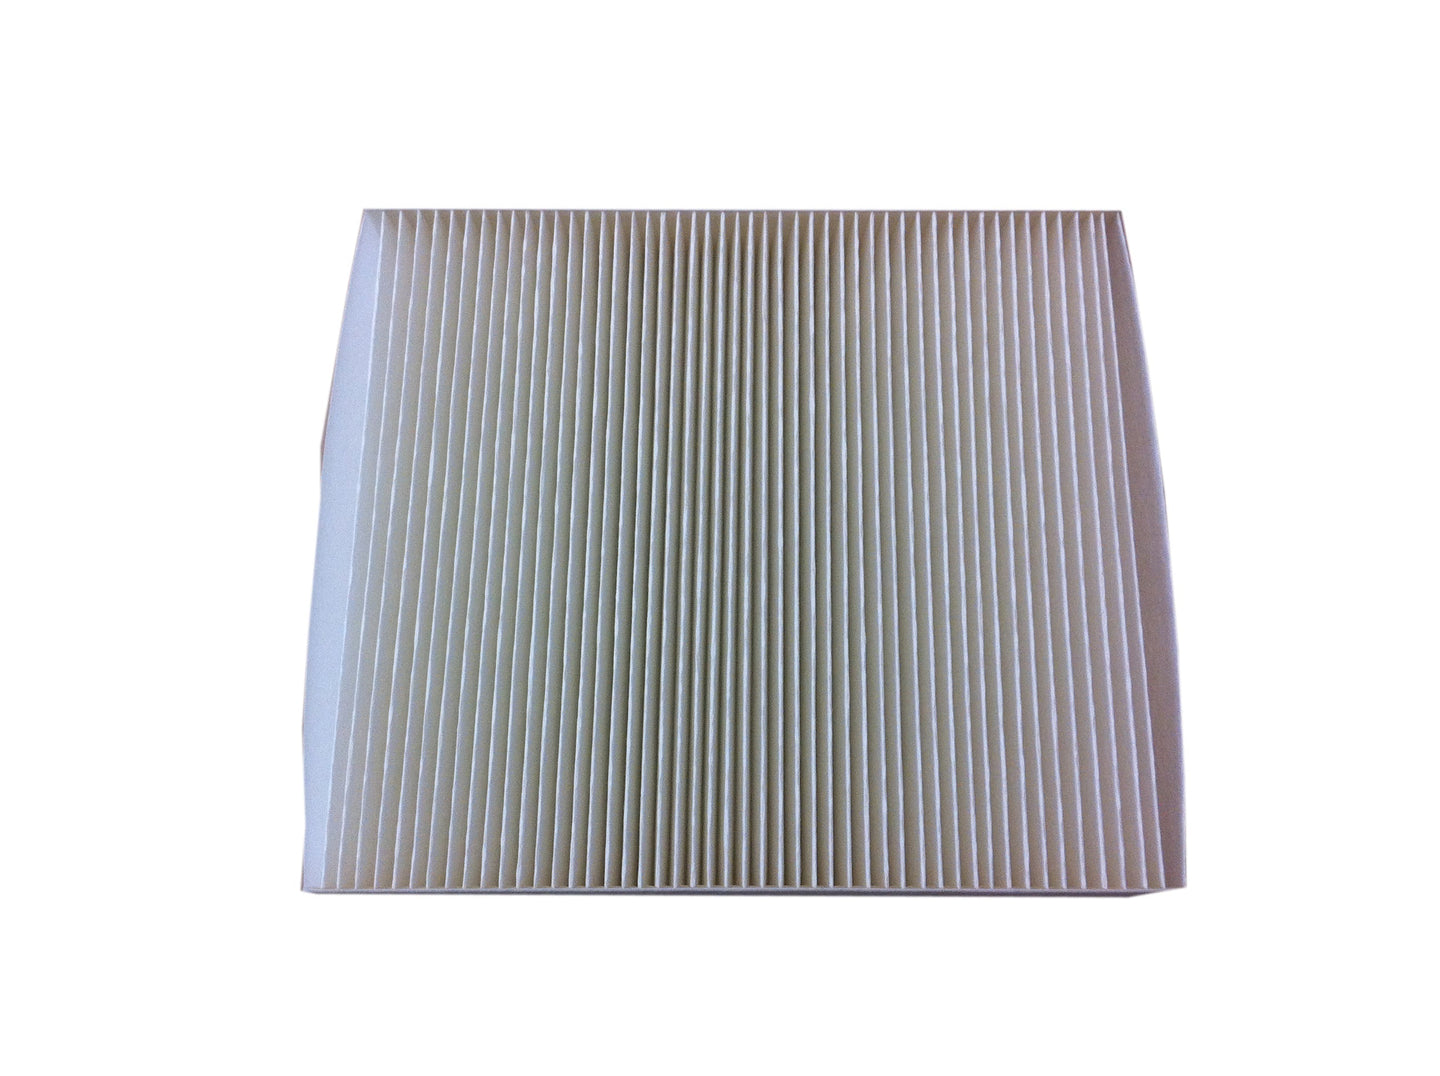 MERCEDES BENZ CABIN AIR FILTERS Alliance Auto Products